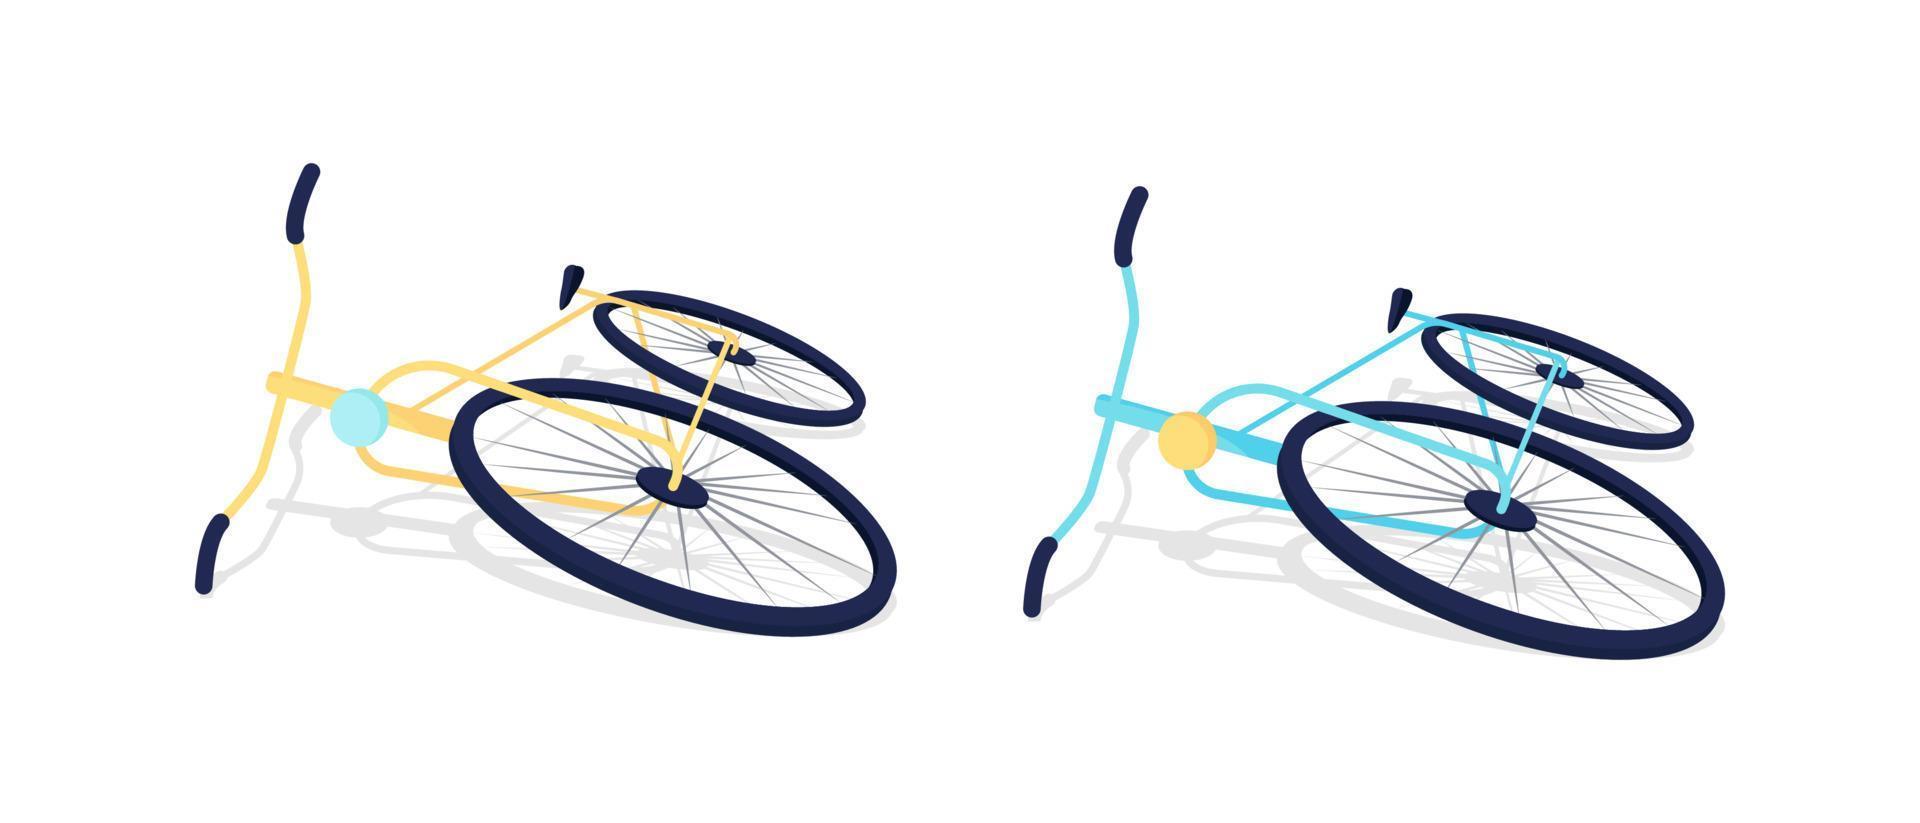 Bicycles lying on ground semi flat color vector objects set